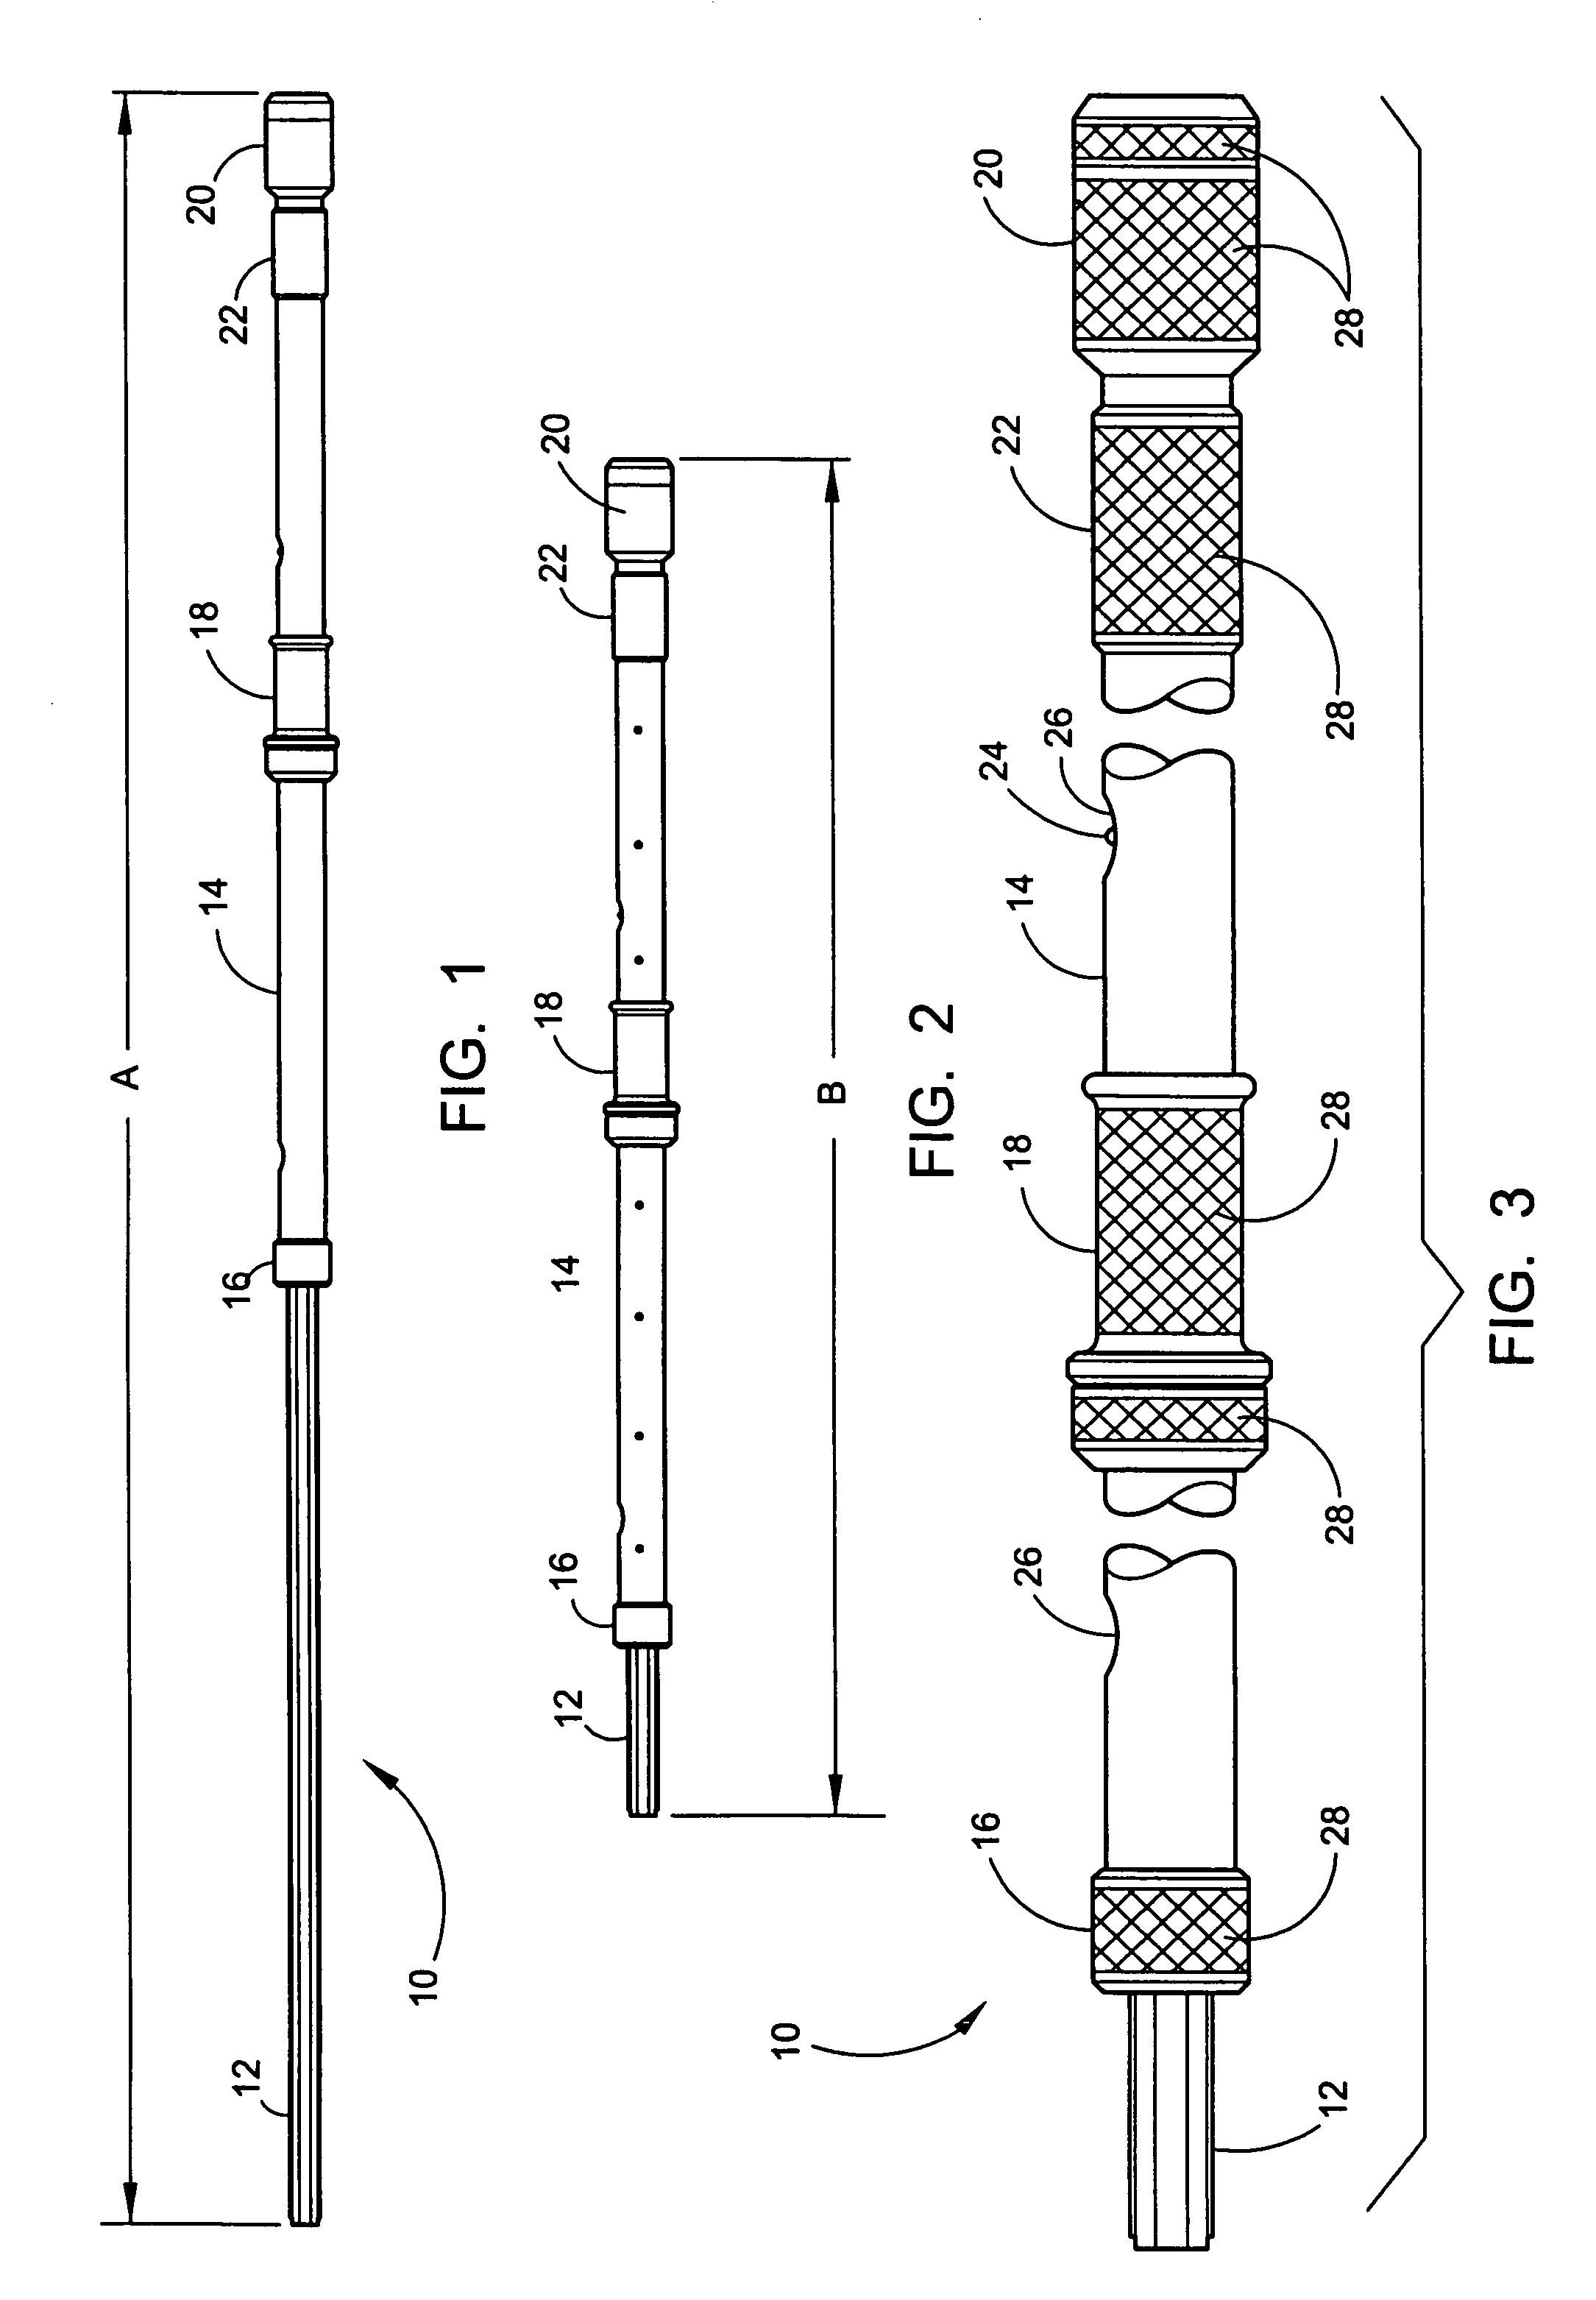 Extendable electronic immobilization staff